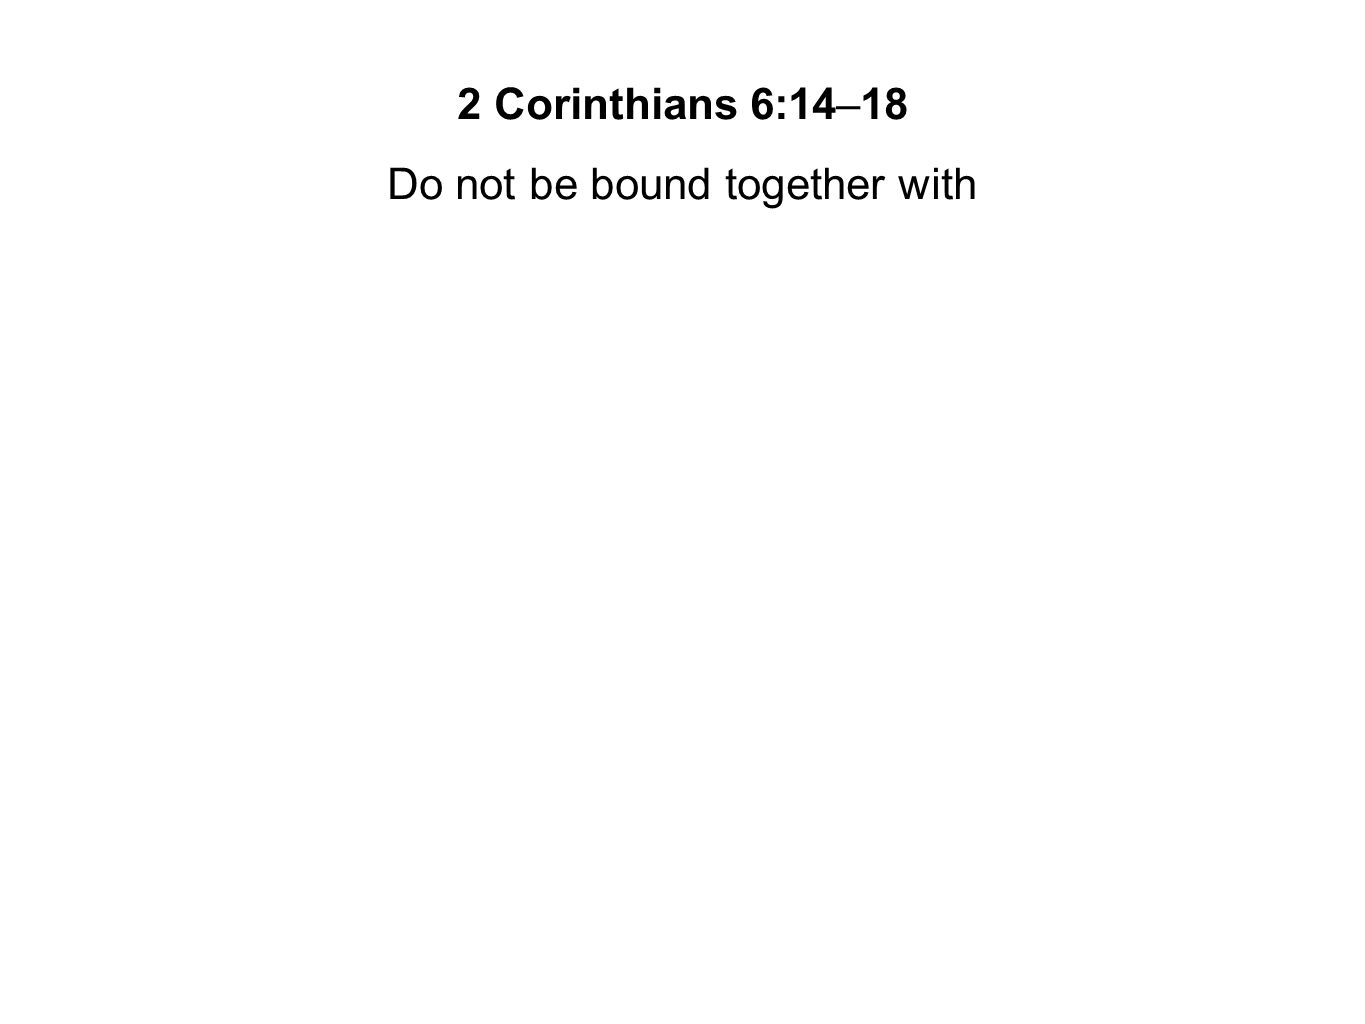 Do not be bound together with